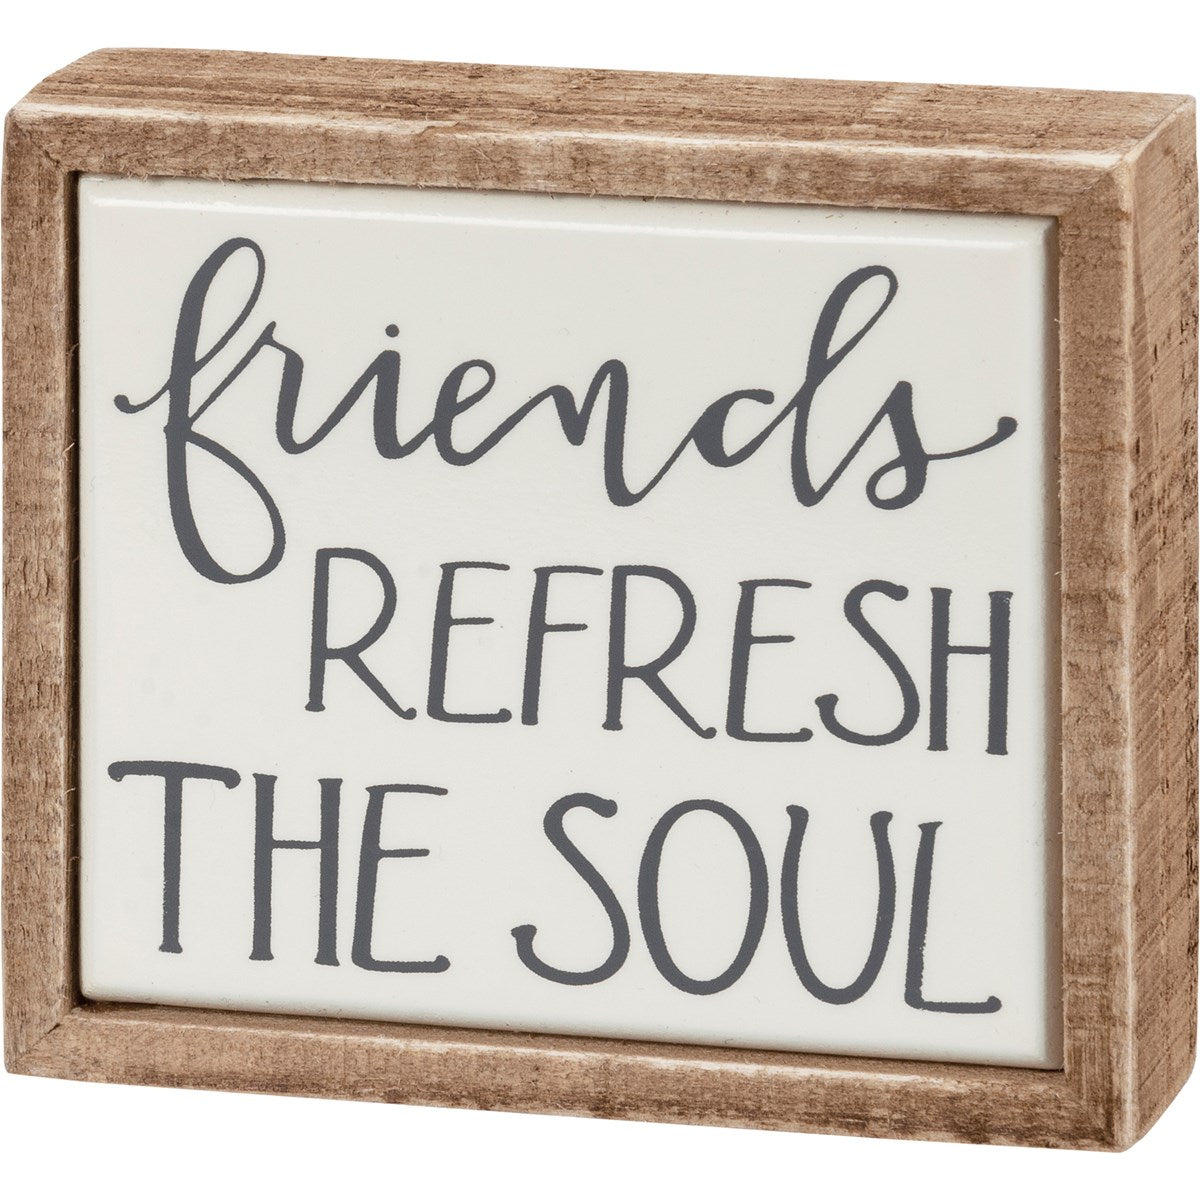 Friends refresh the soul